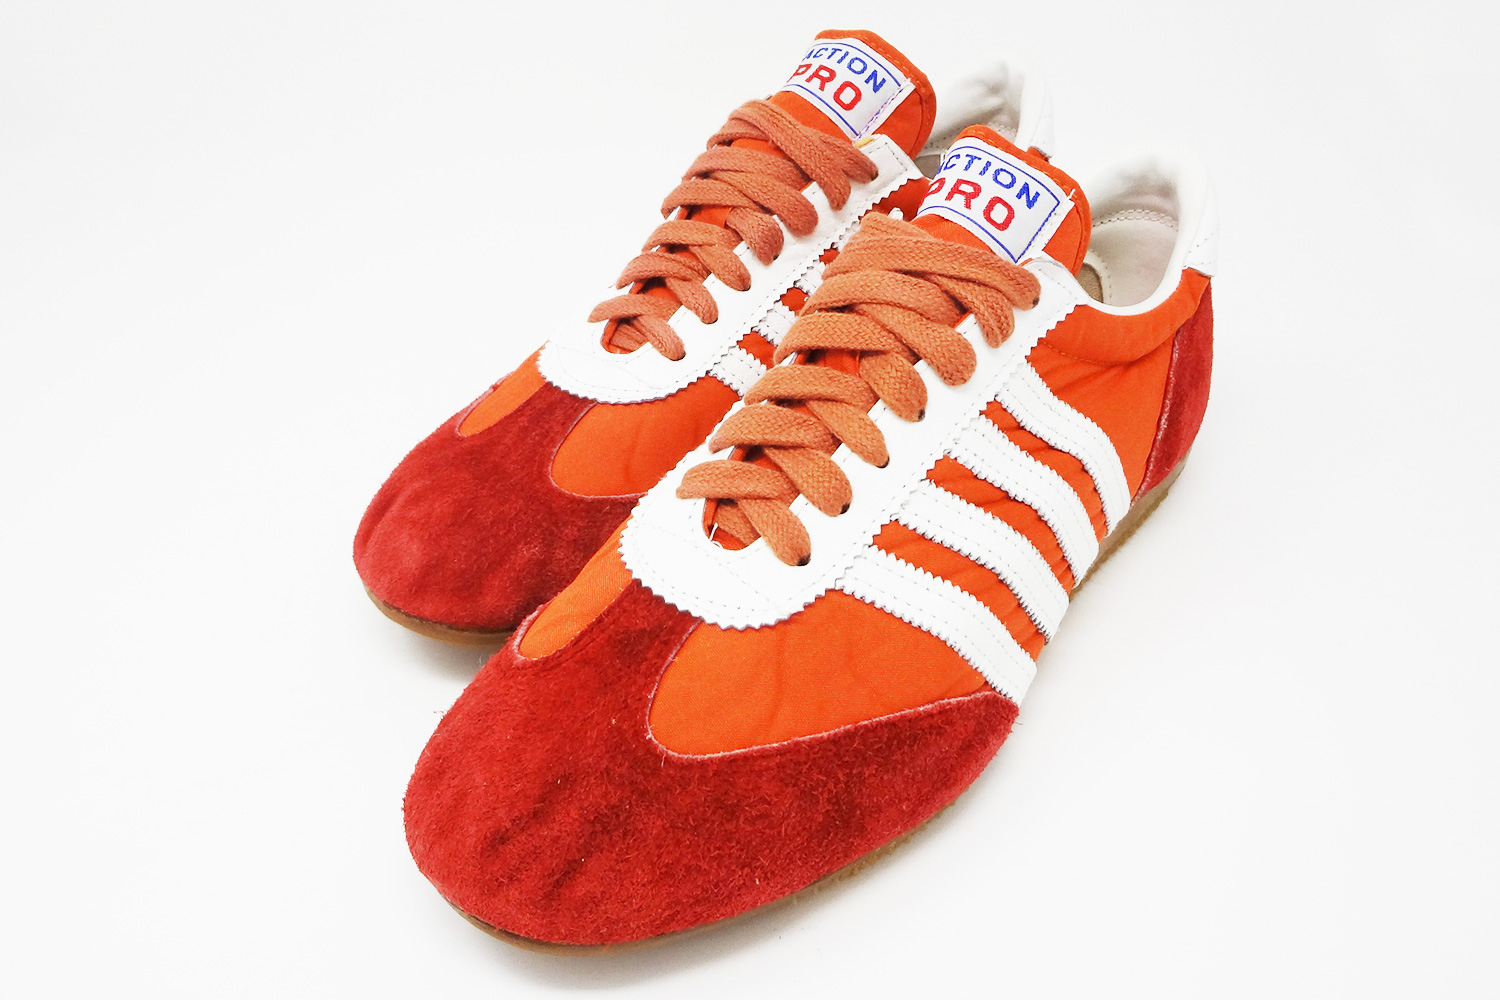 Old school Action Pro 70s 80s adidas style vintage sneakers @ The Deffest